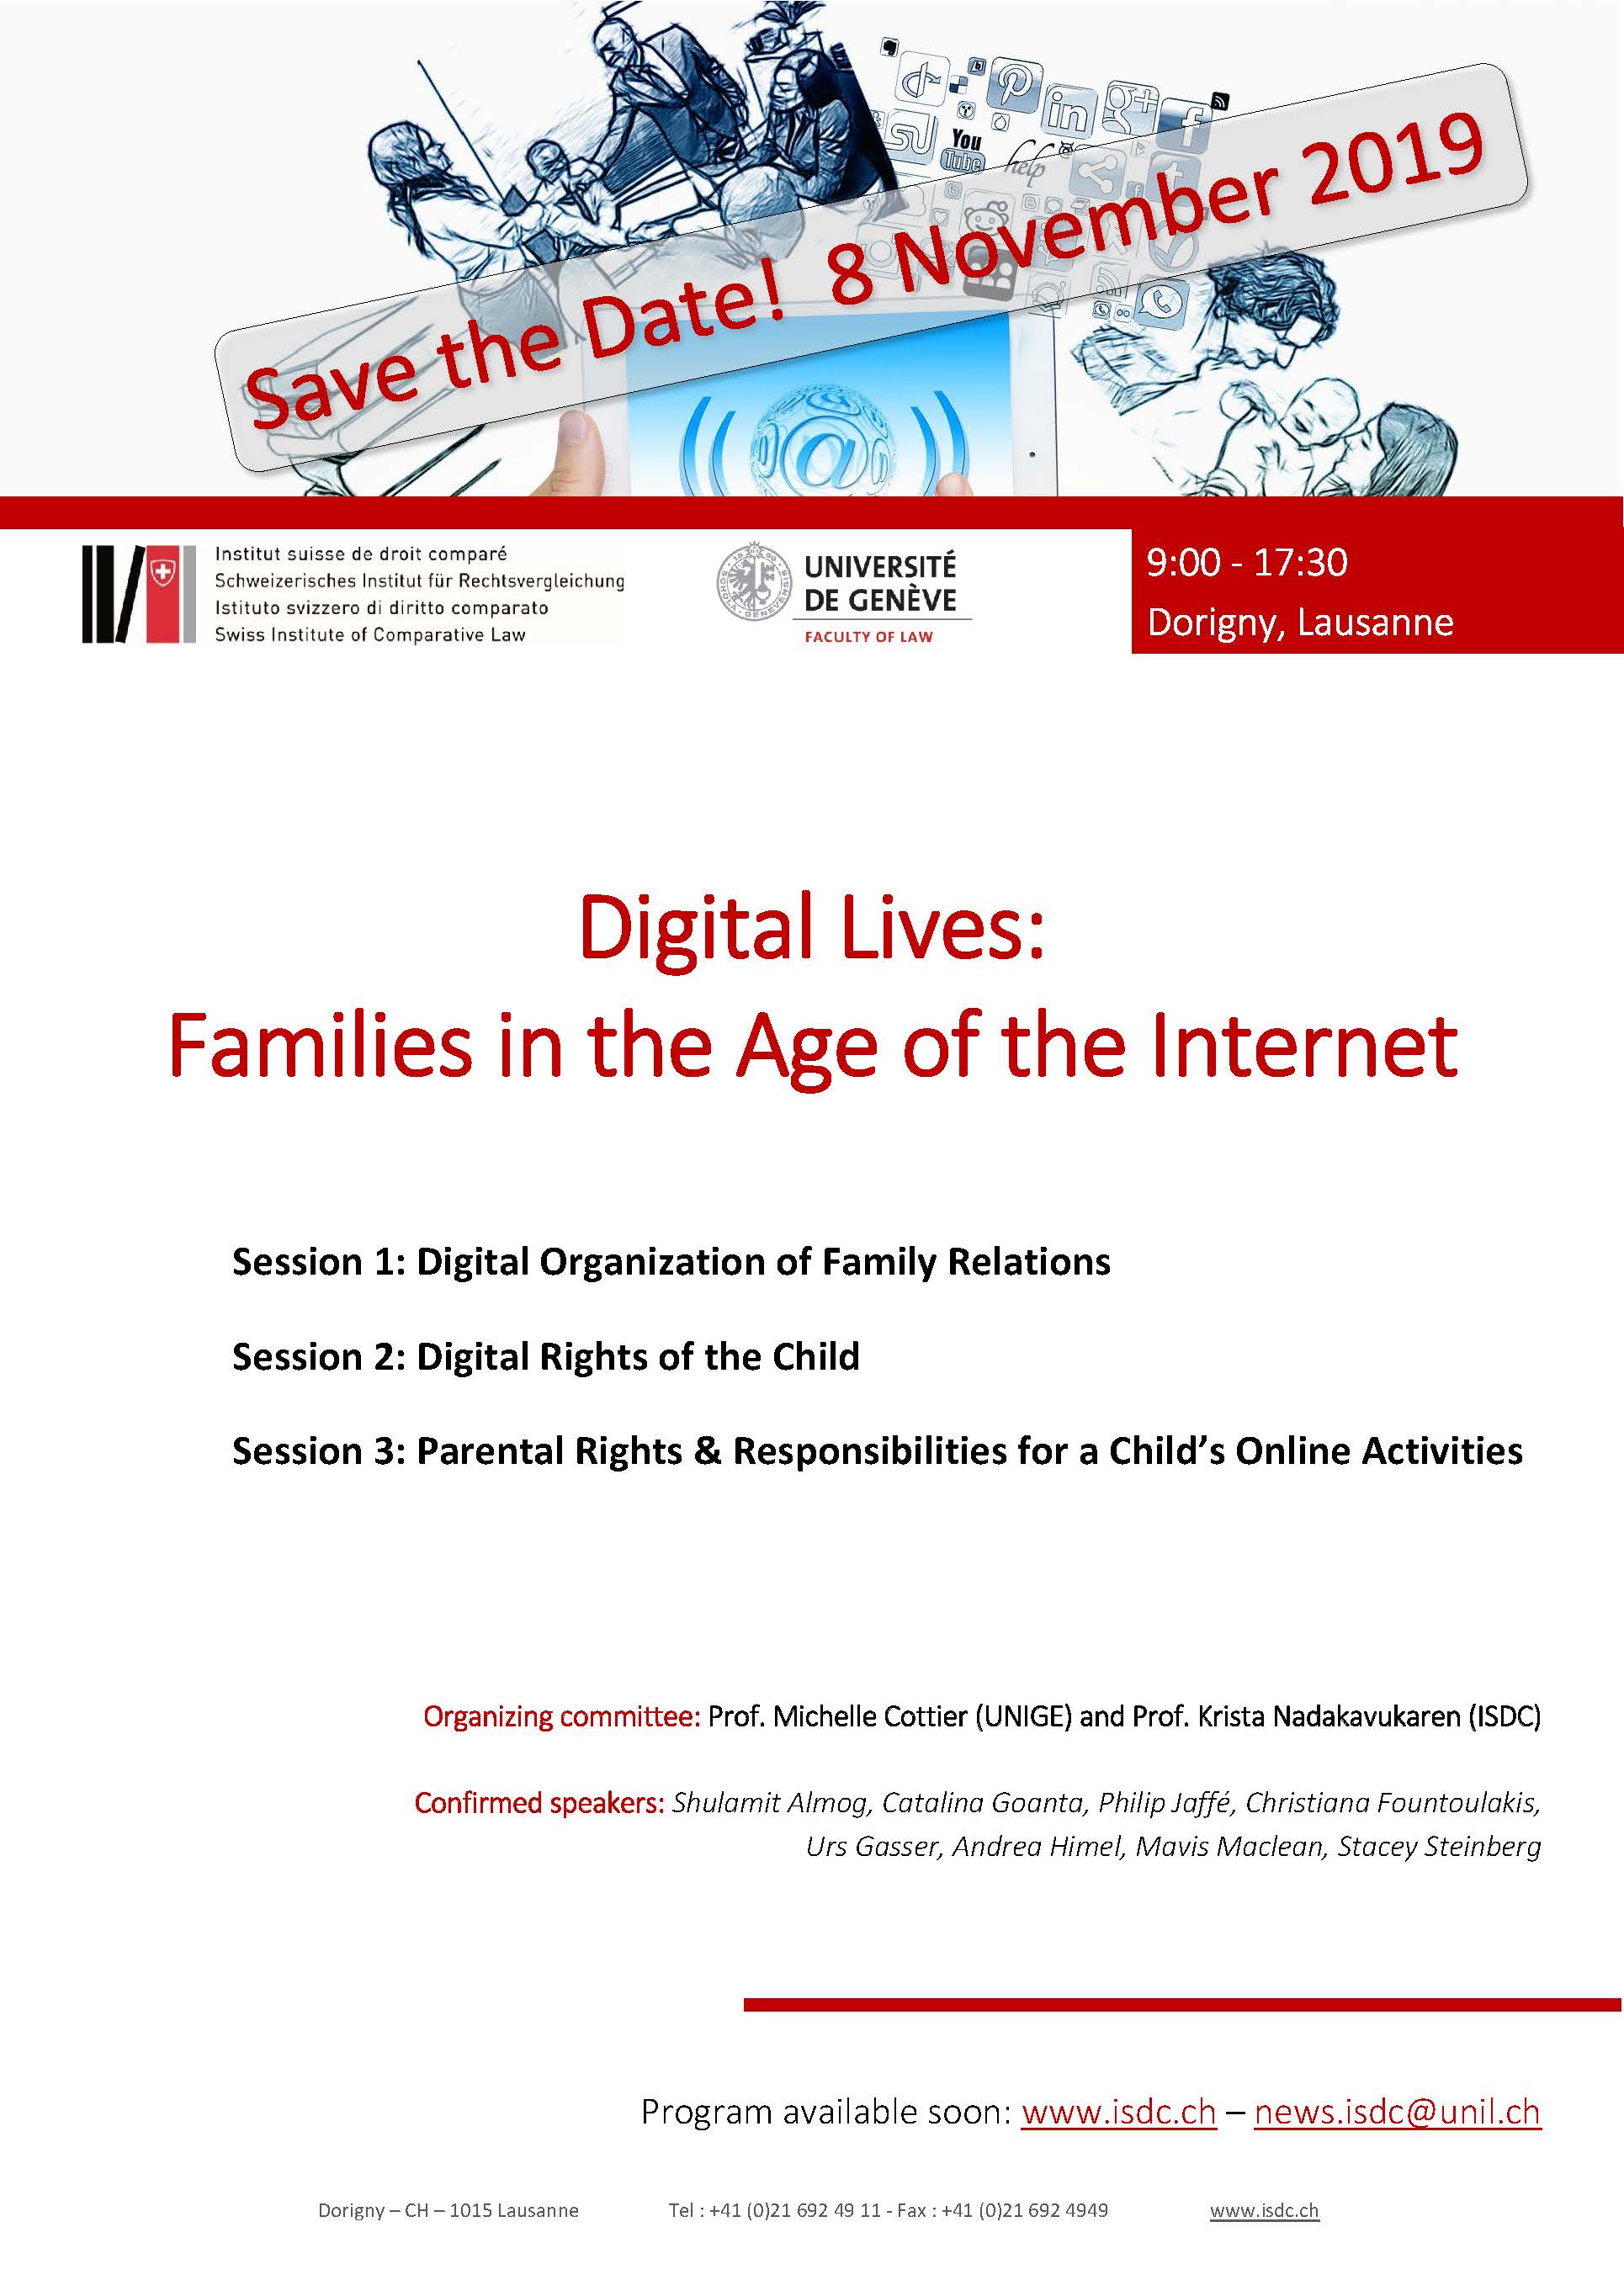 Digital Lives: Families in the Age of the Internet